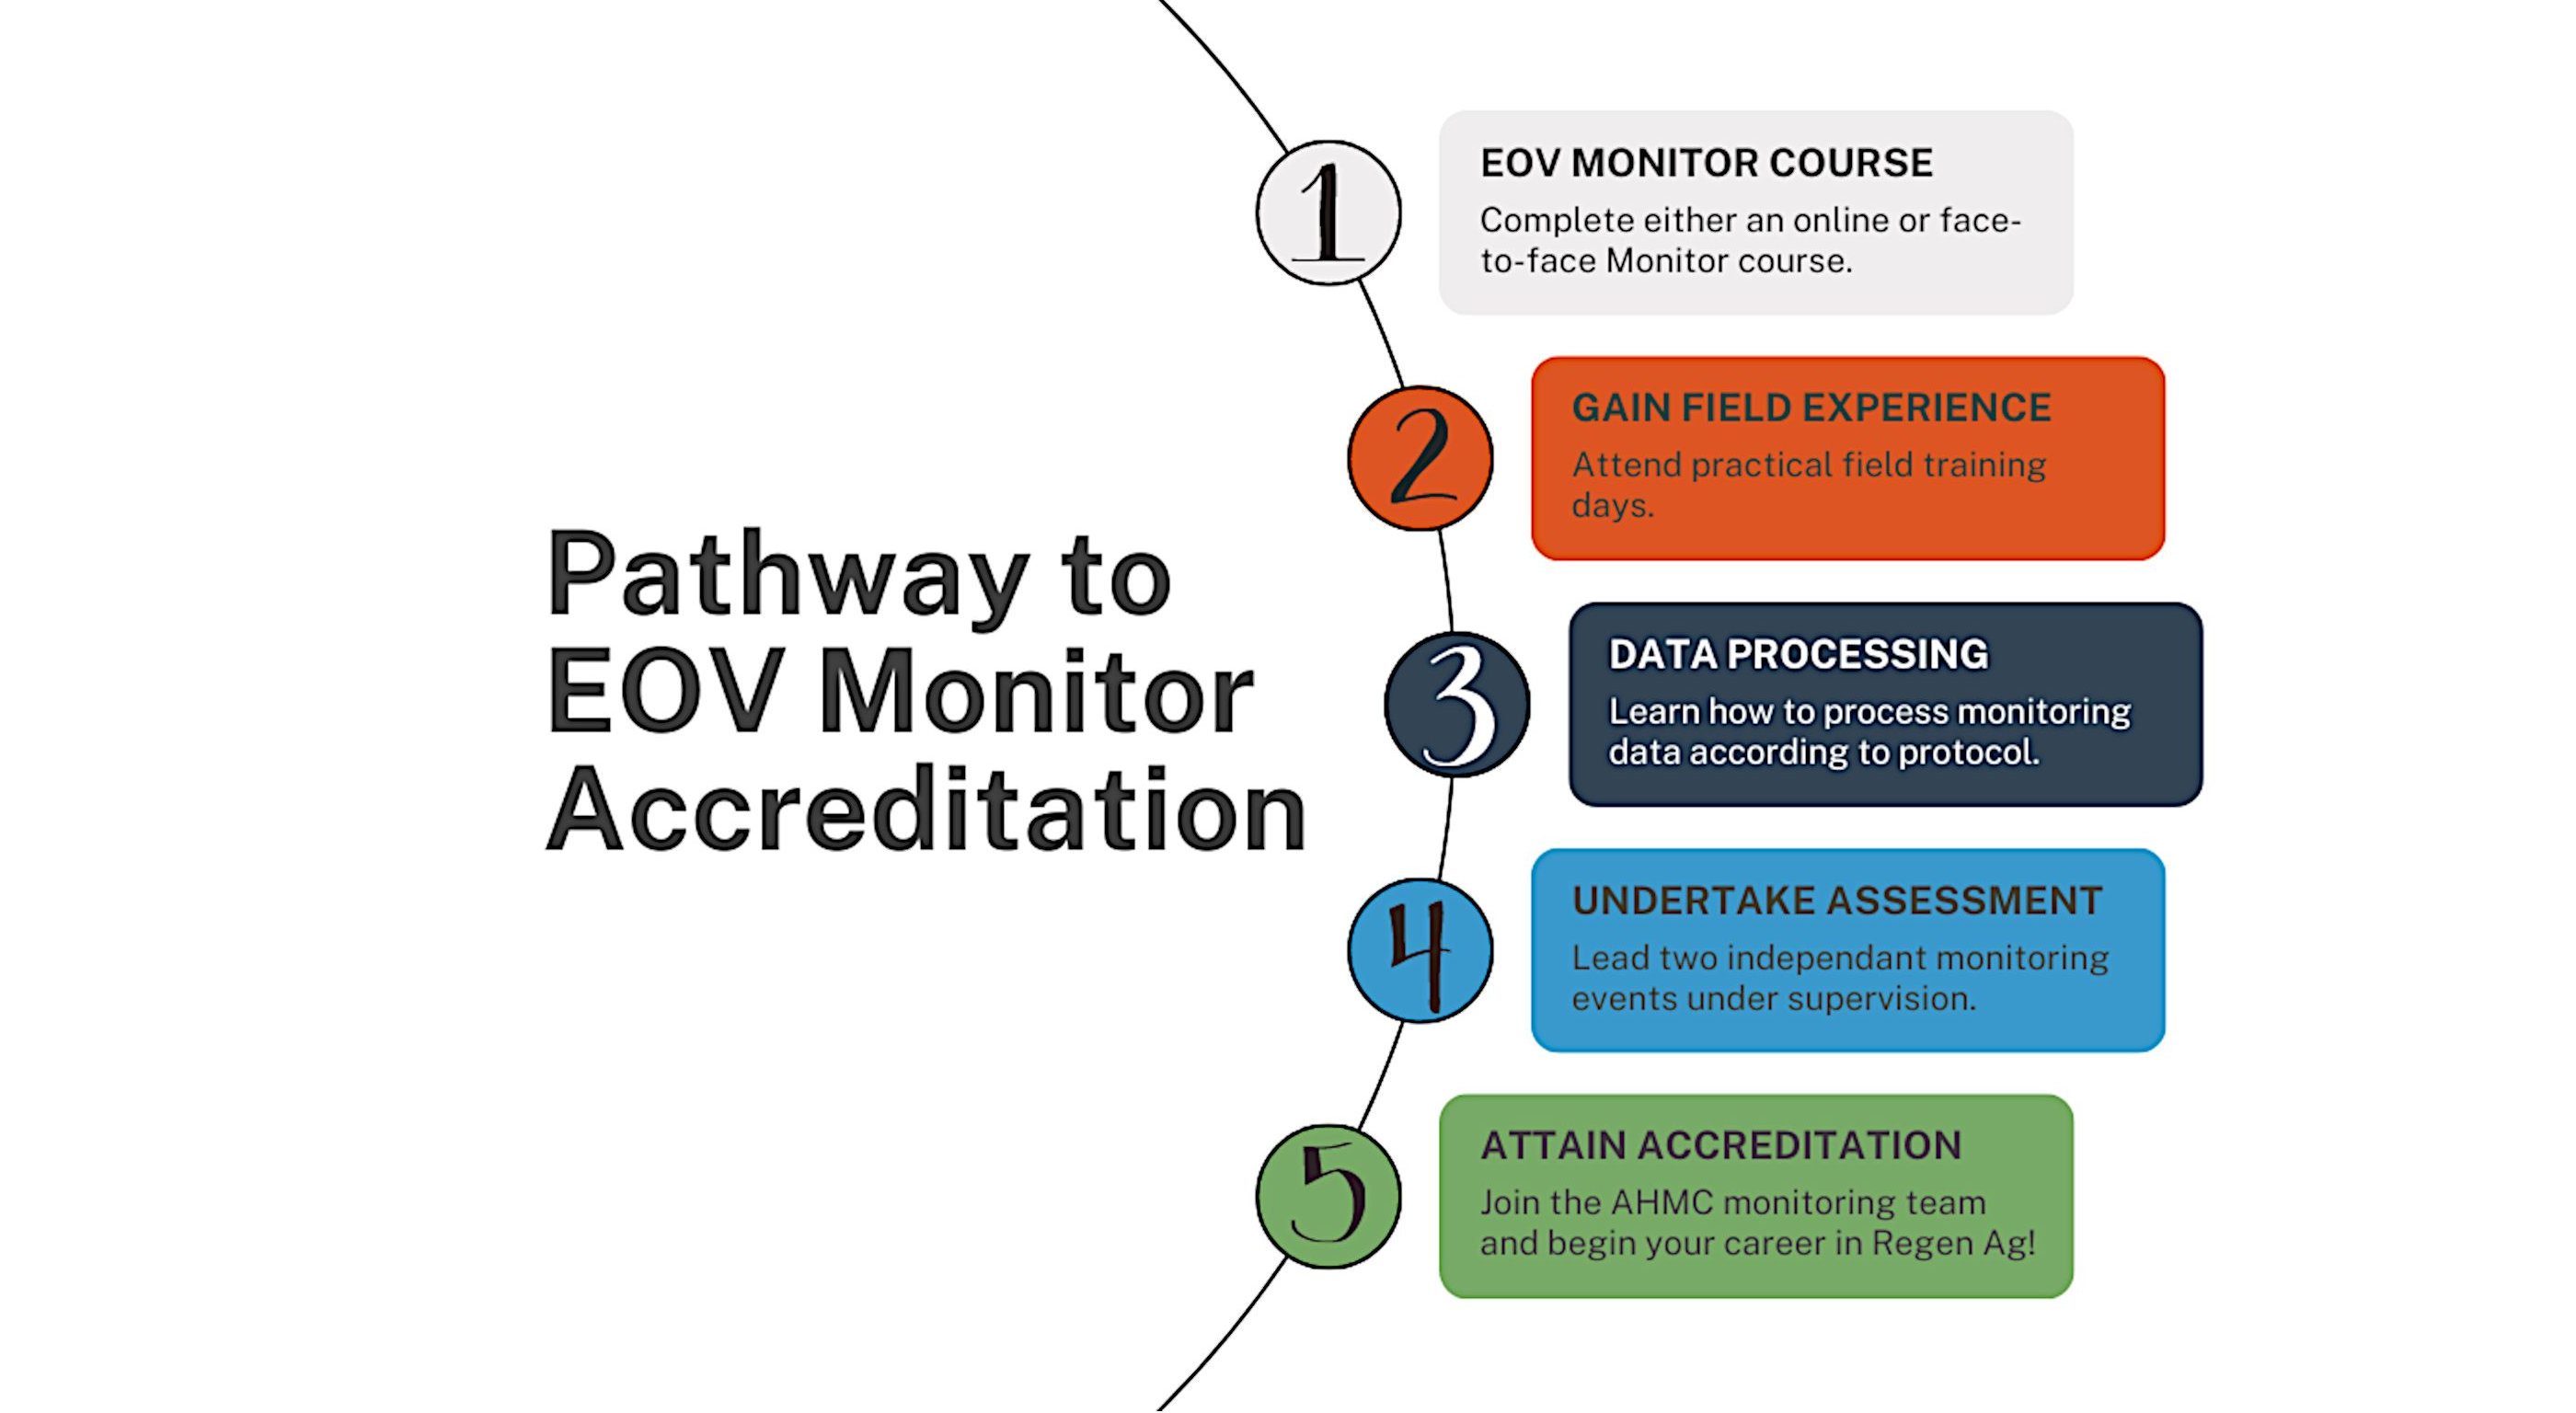 Pathway to EOV Monitoring